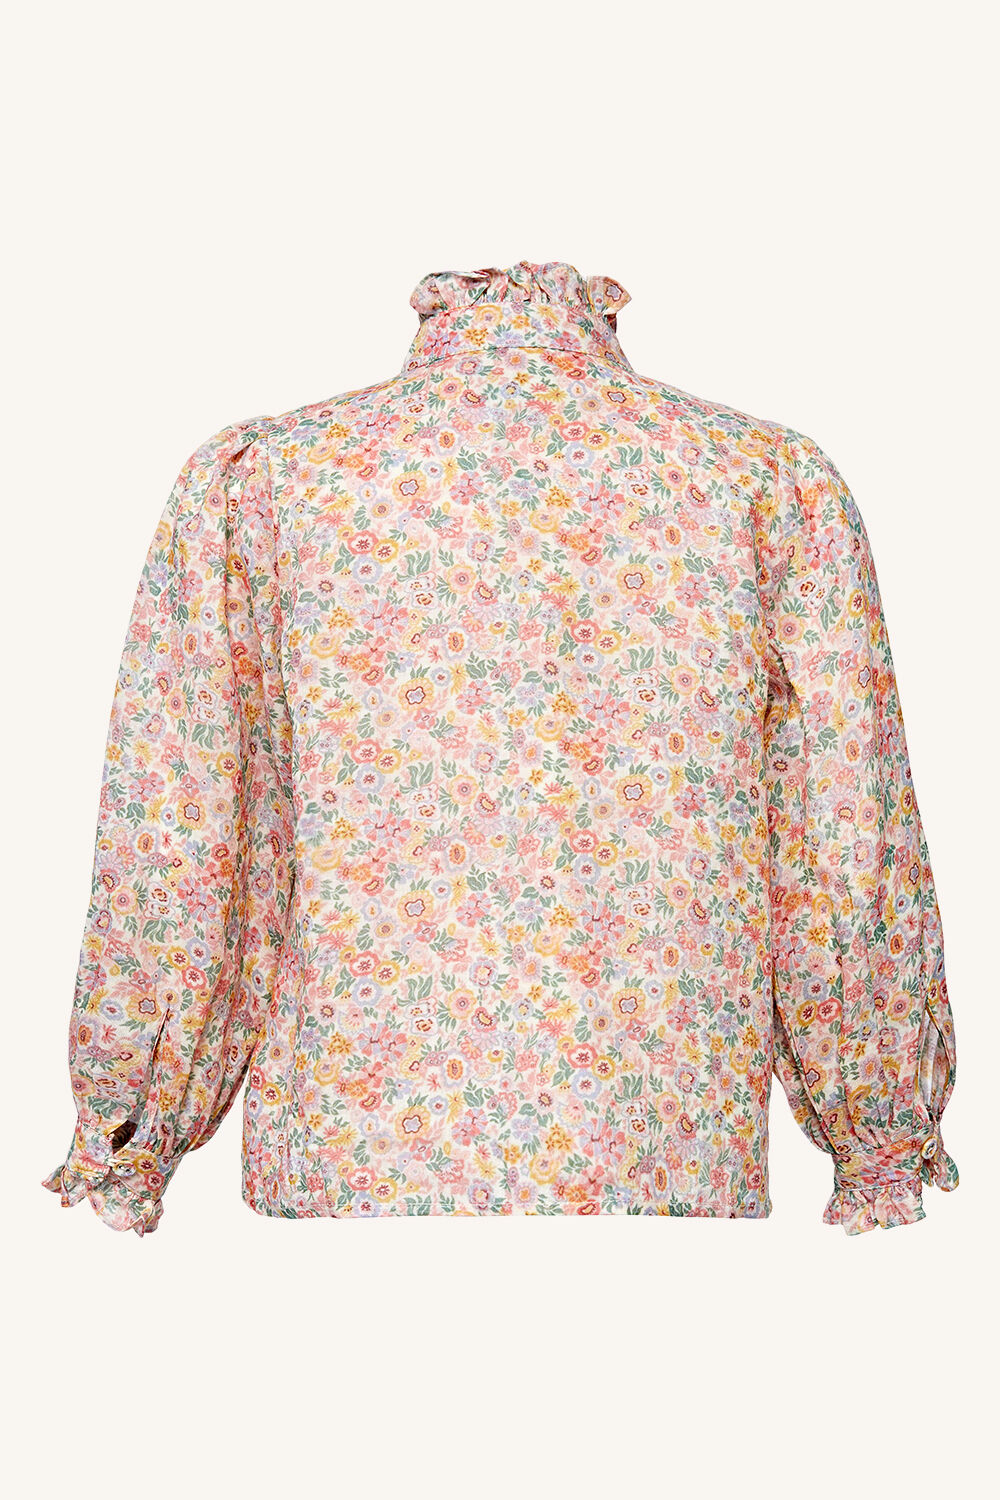 Girls AMELIA FLORAL BLOUSE in colour VIBRANT YELLOW